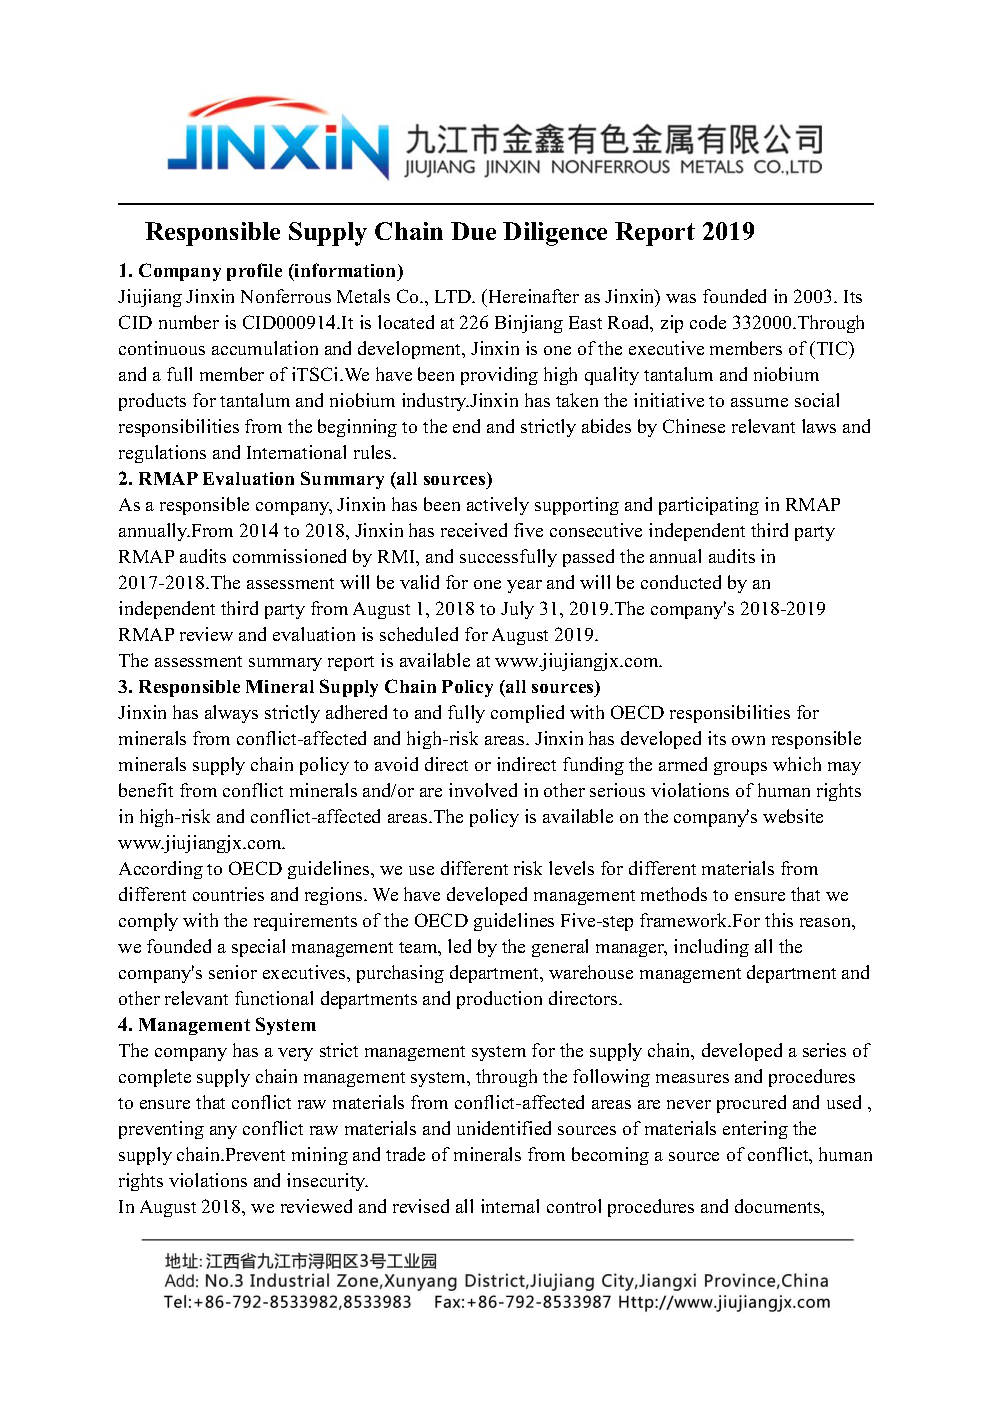 DUE DILIGENCE REPORT  2019